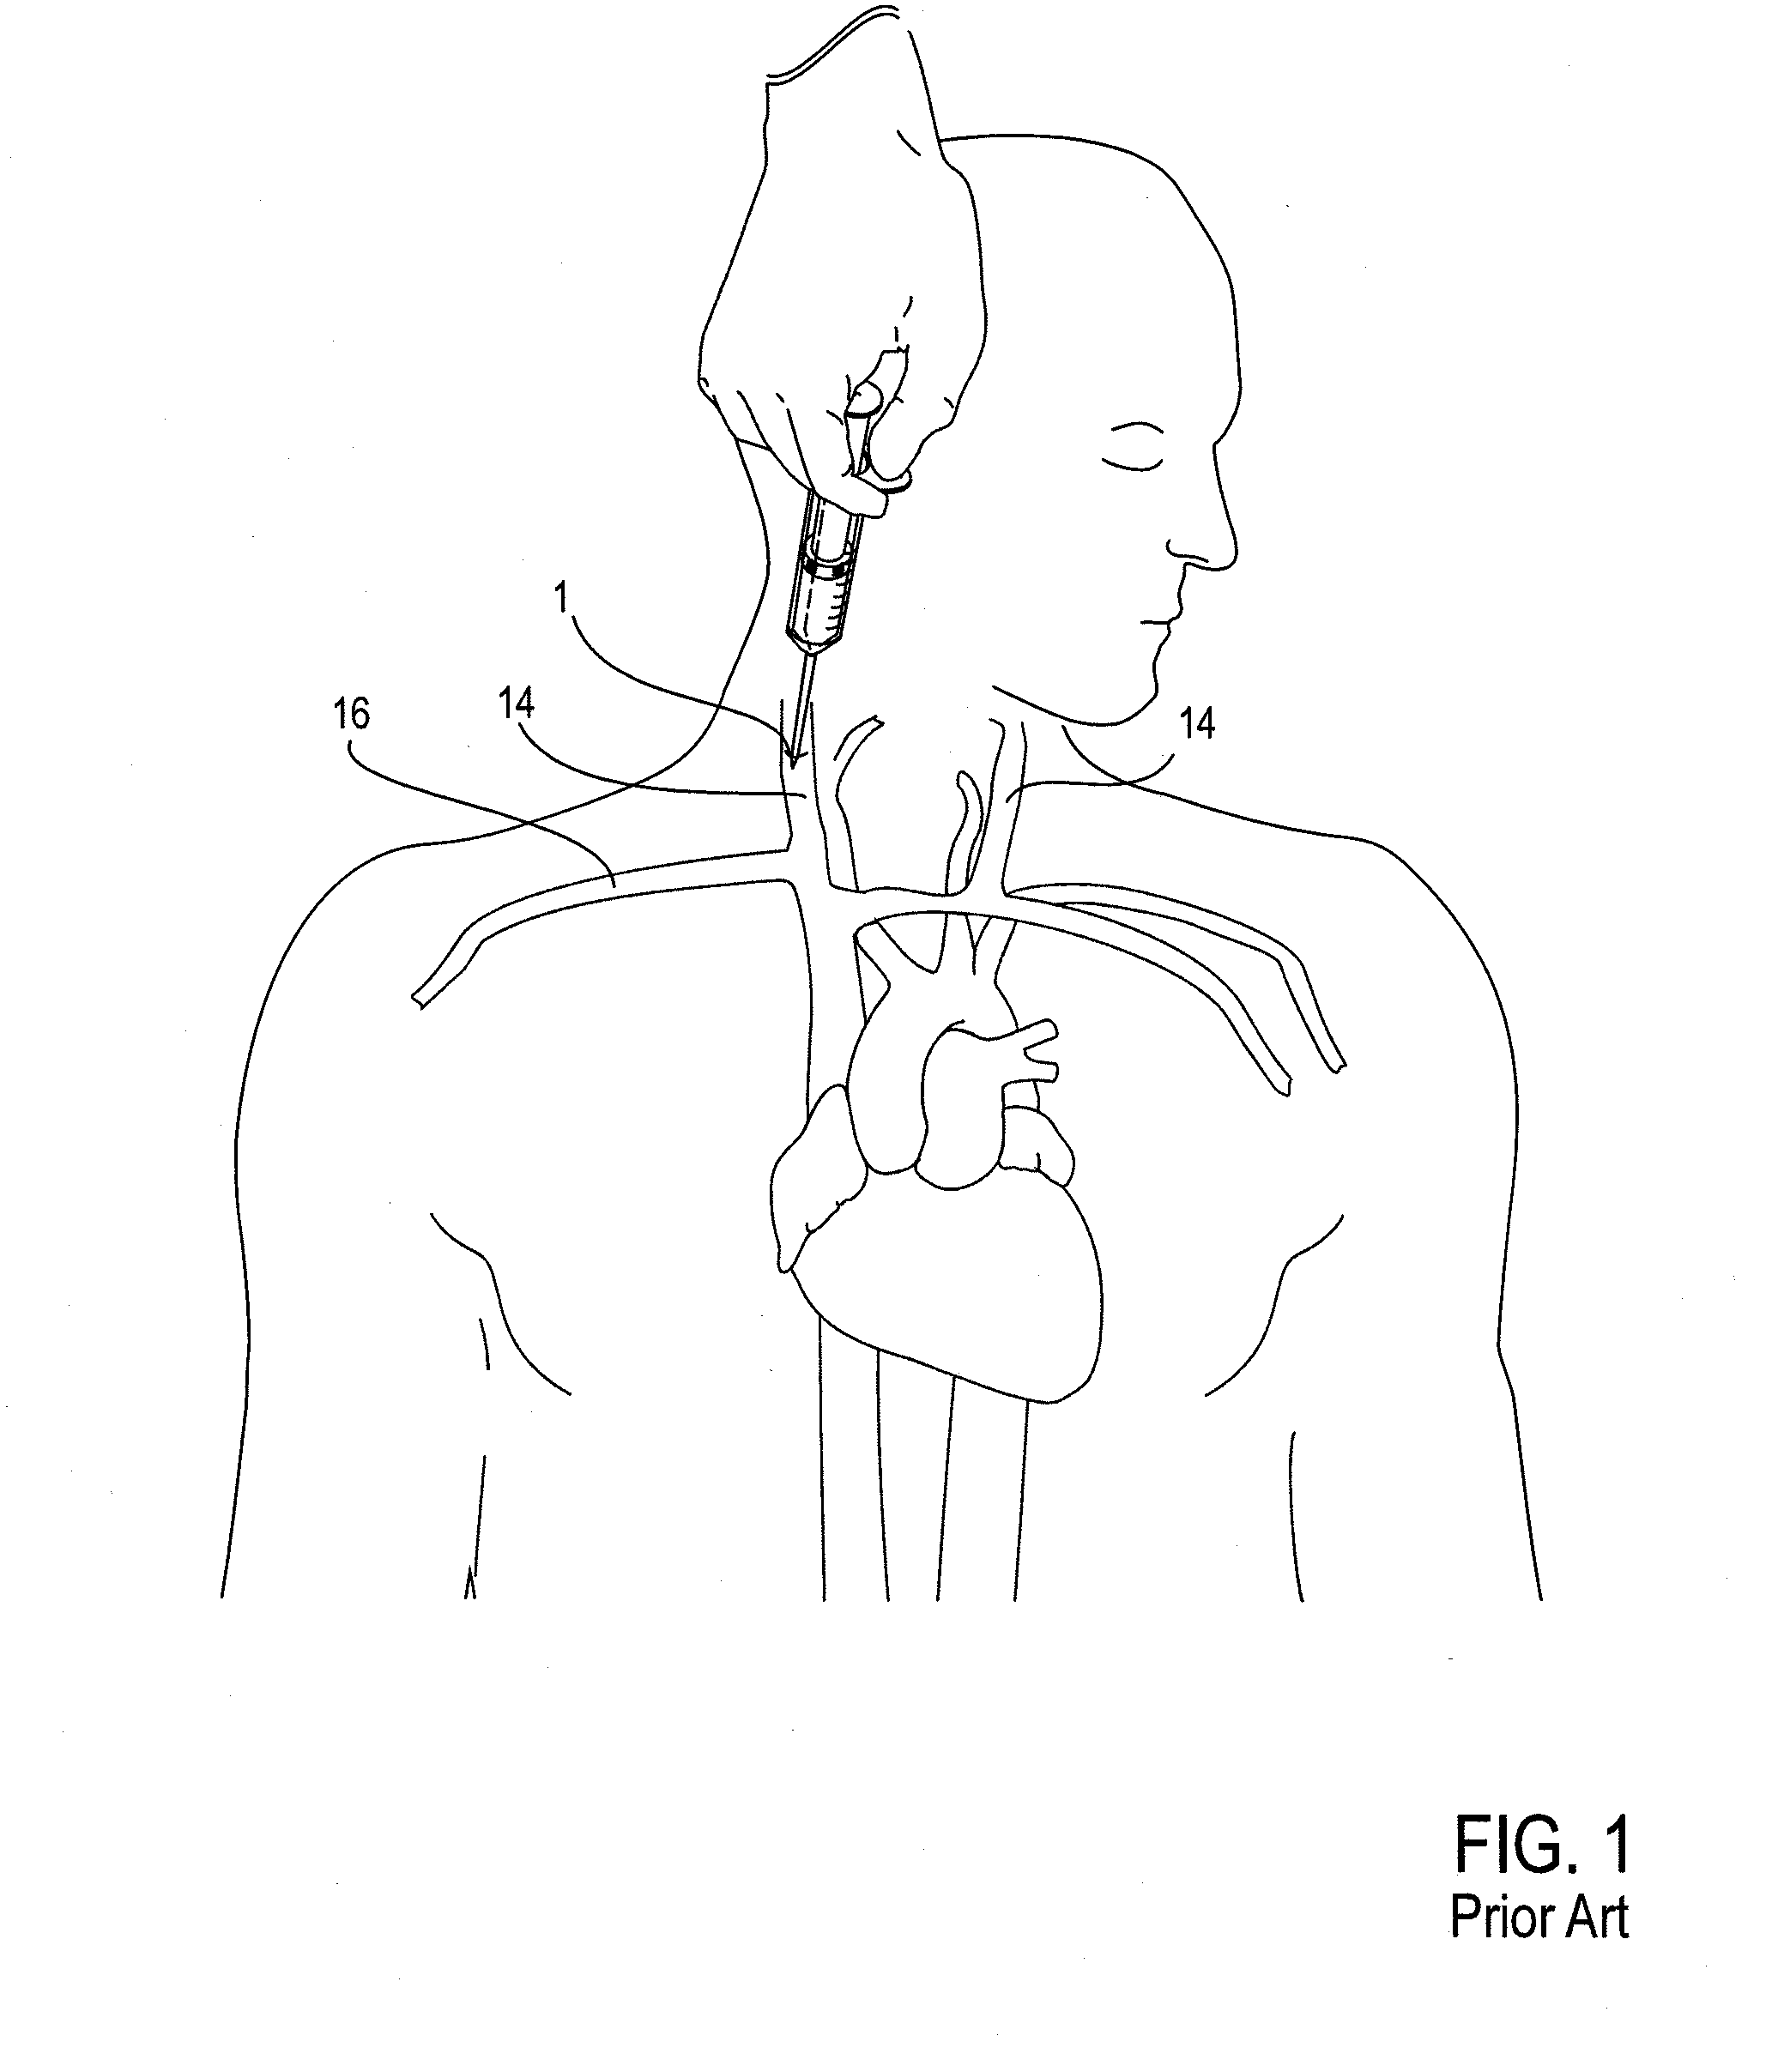 Methods of Transvascular Retrograde Access Placement and Devices for Facilitating the Placement